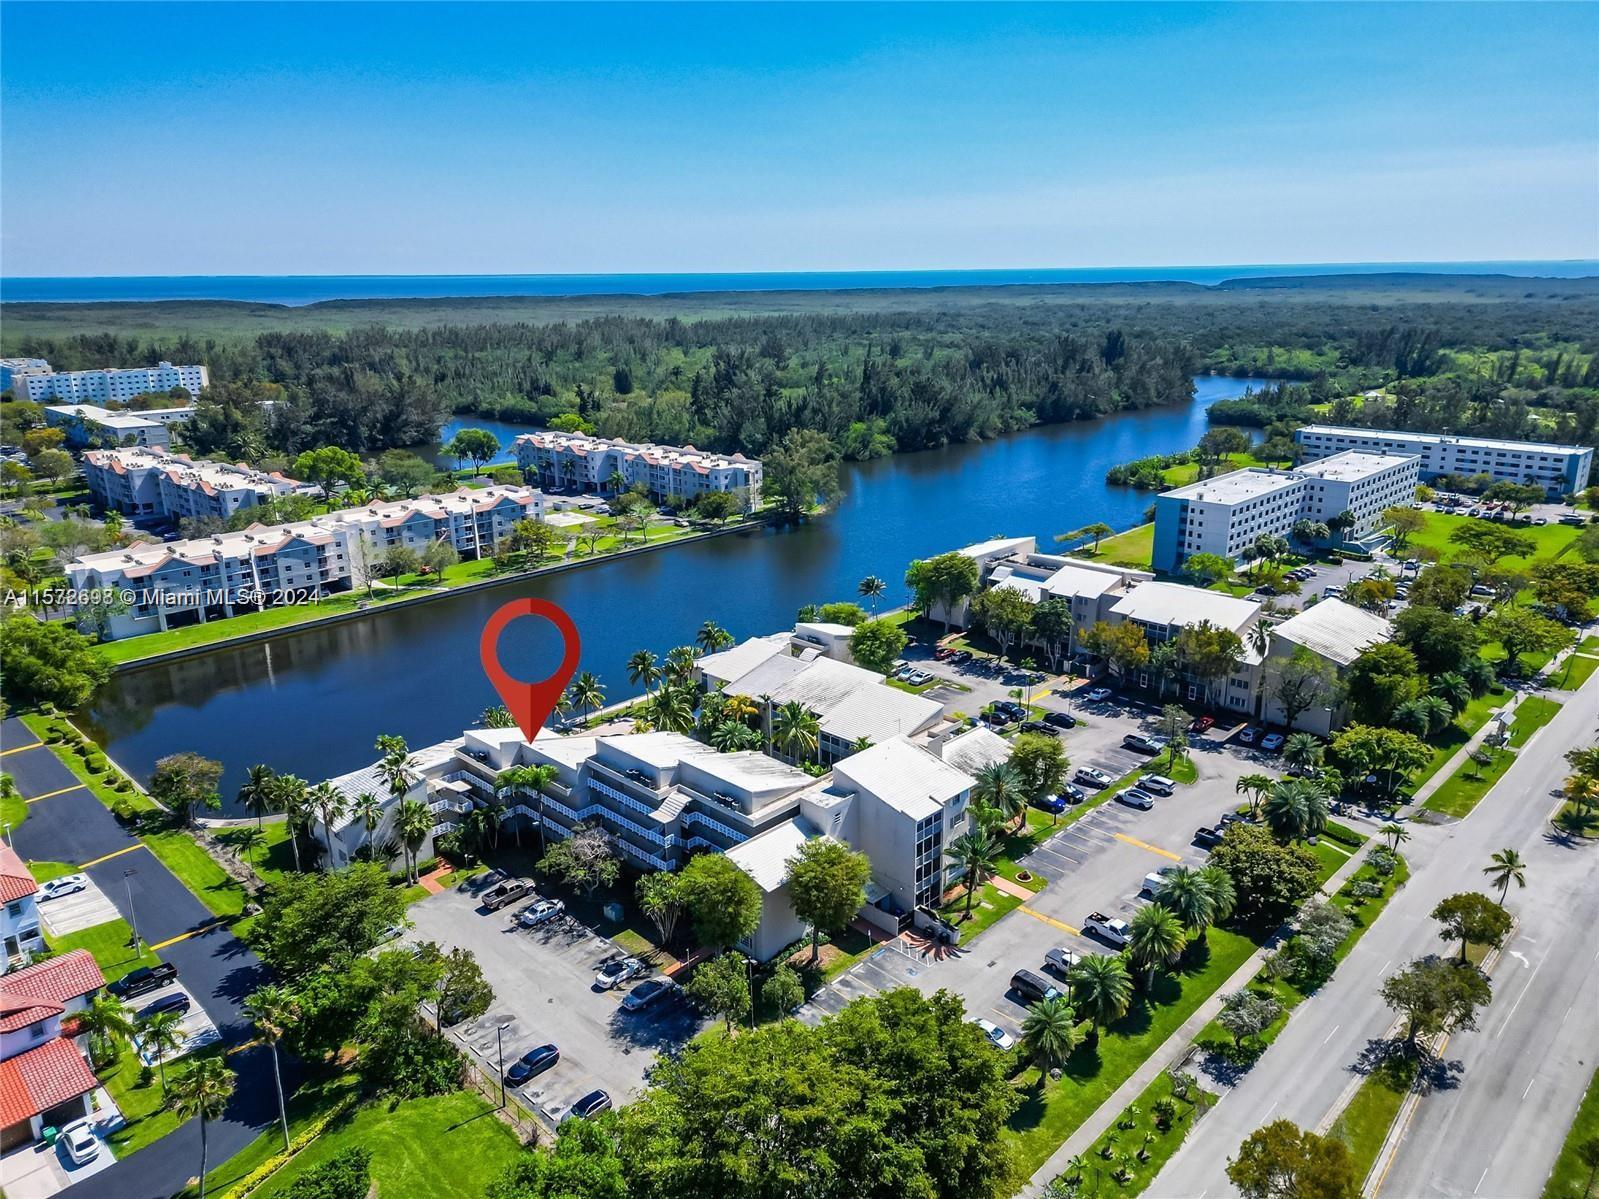 A MUST SEE is what this spacious and well laid out 2 bedroom 2 bath waterfront gated condo is in "The Cove Condo" in Cutler Bay. This unit has loads of natural light, closet space and an awesome balcony with garden view that can be viewed and enjoyed from the Primary bedroom and living room. The kitchen has all new Stainless Steel appliances and is large enough to accommodate a breakfast nook.  The Central A/C was replaced in late 2020.   Amenities include:  An assigned parking space, plenty of visitor parking spaces, swimming pool and laundry facilities.